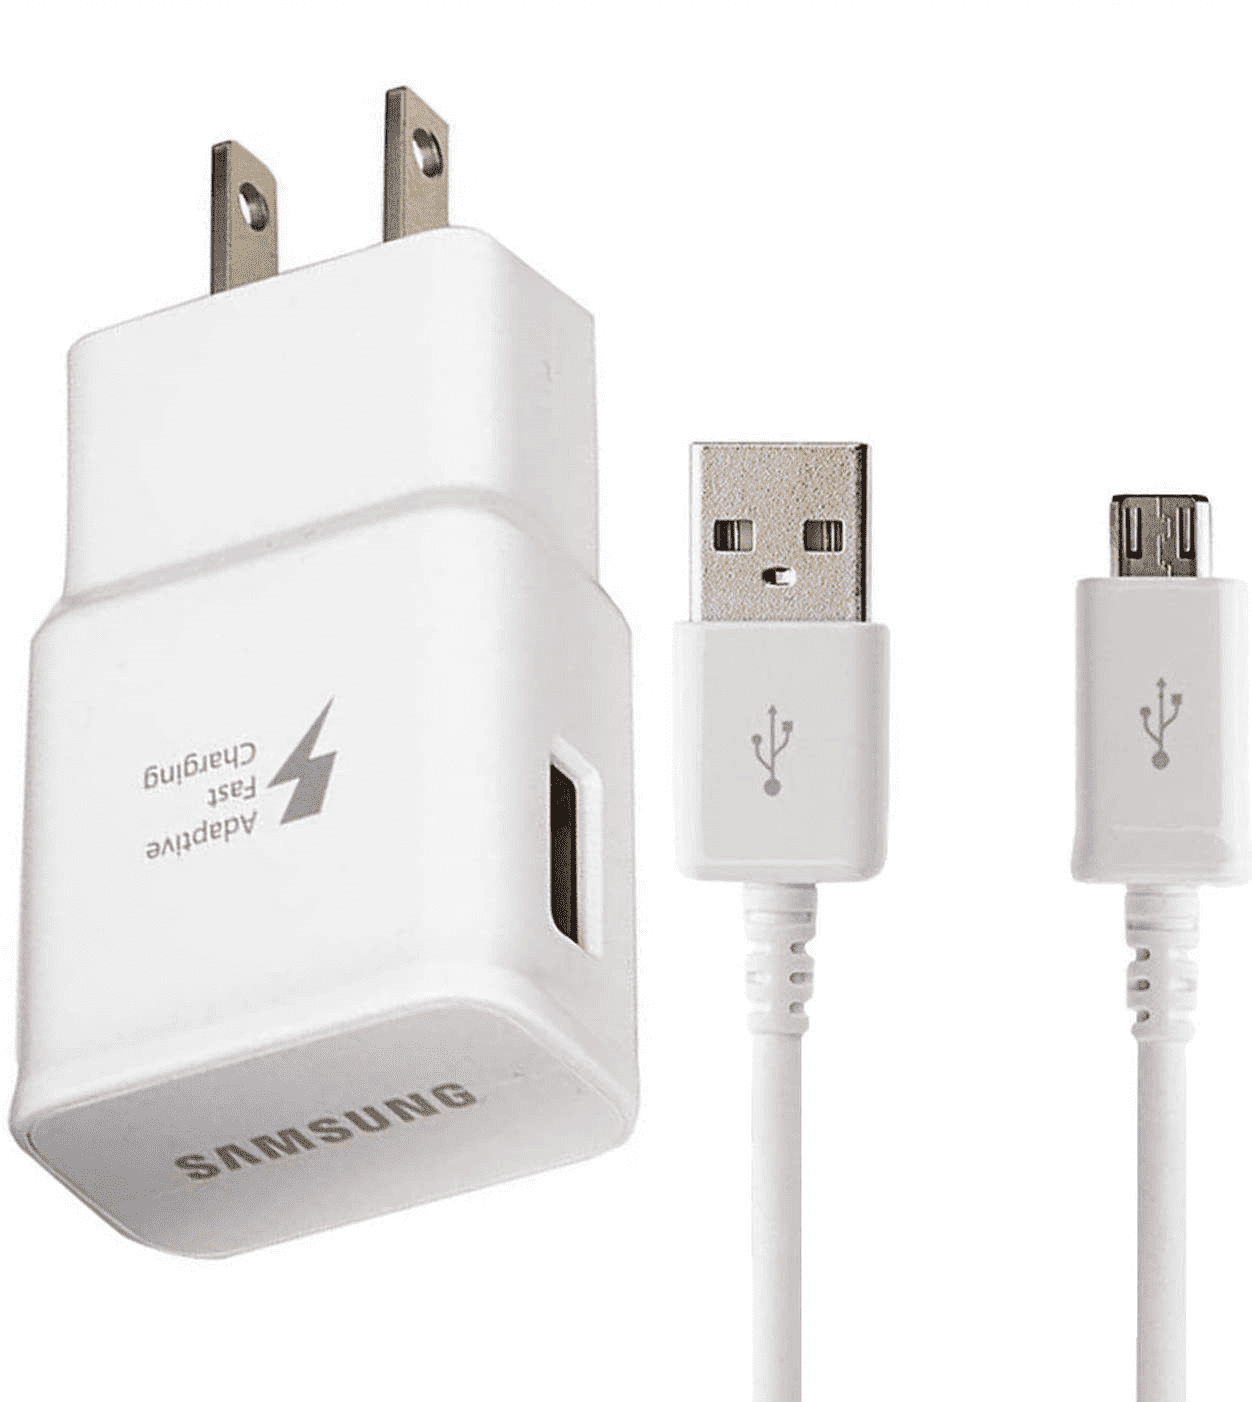 Verfijning moeilijk Lieve Adaptive Fast Wall Adapter Micro USB Charger for Samsung Galaxy S6 edge  Bundled with UrbanX Micro USB Cable Cord 6ft Super Fast Charging Kit -  White - Walmart.com